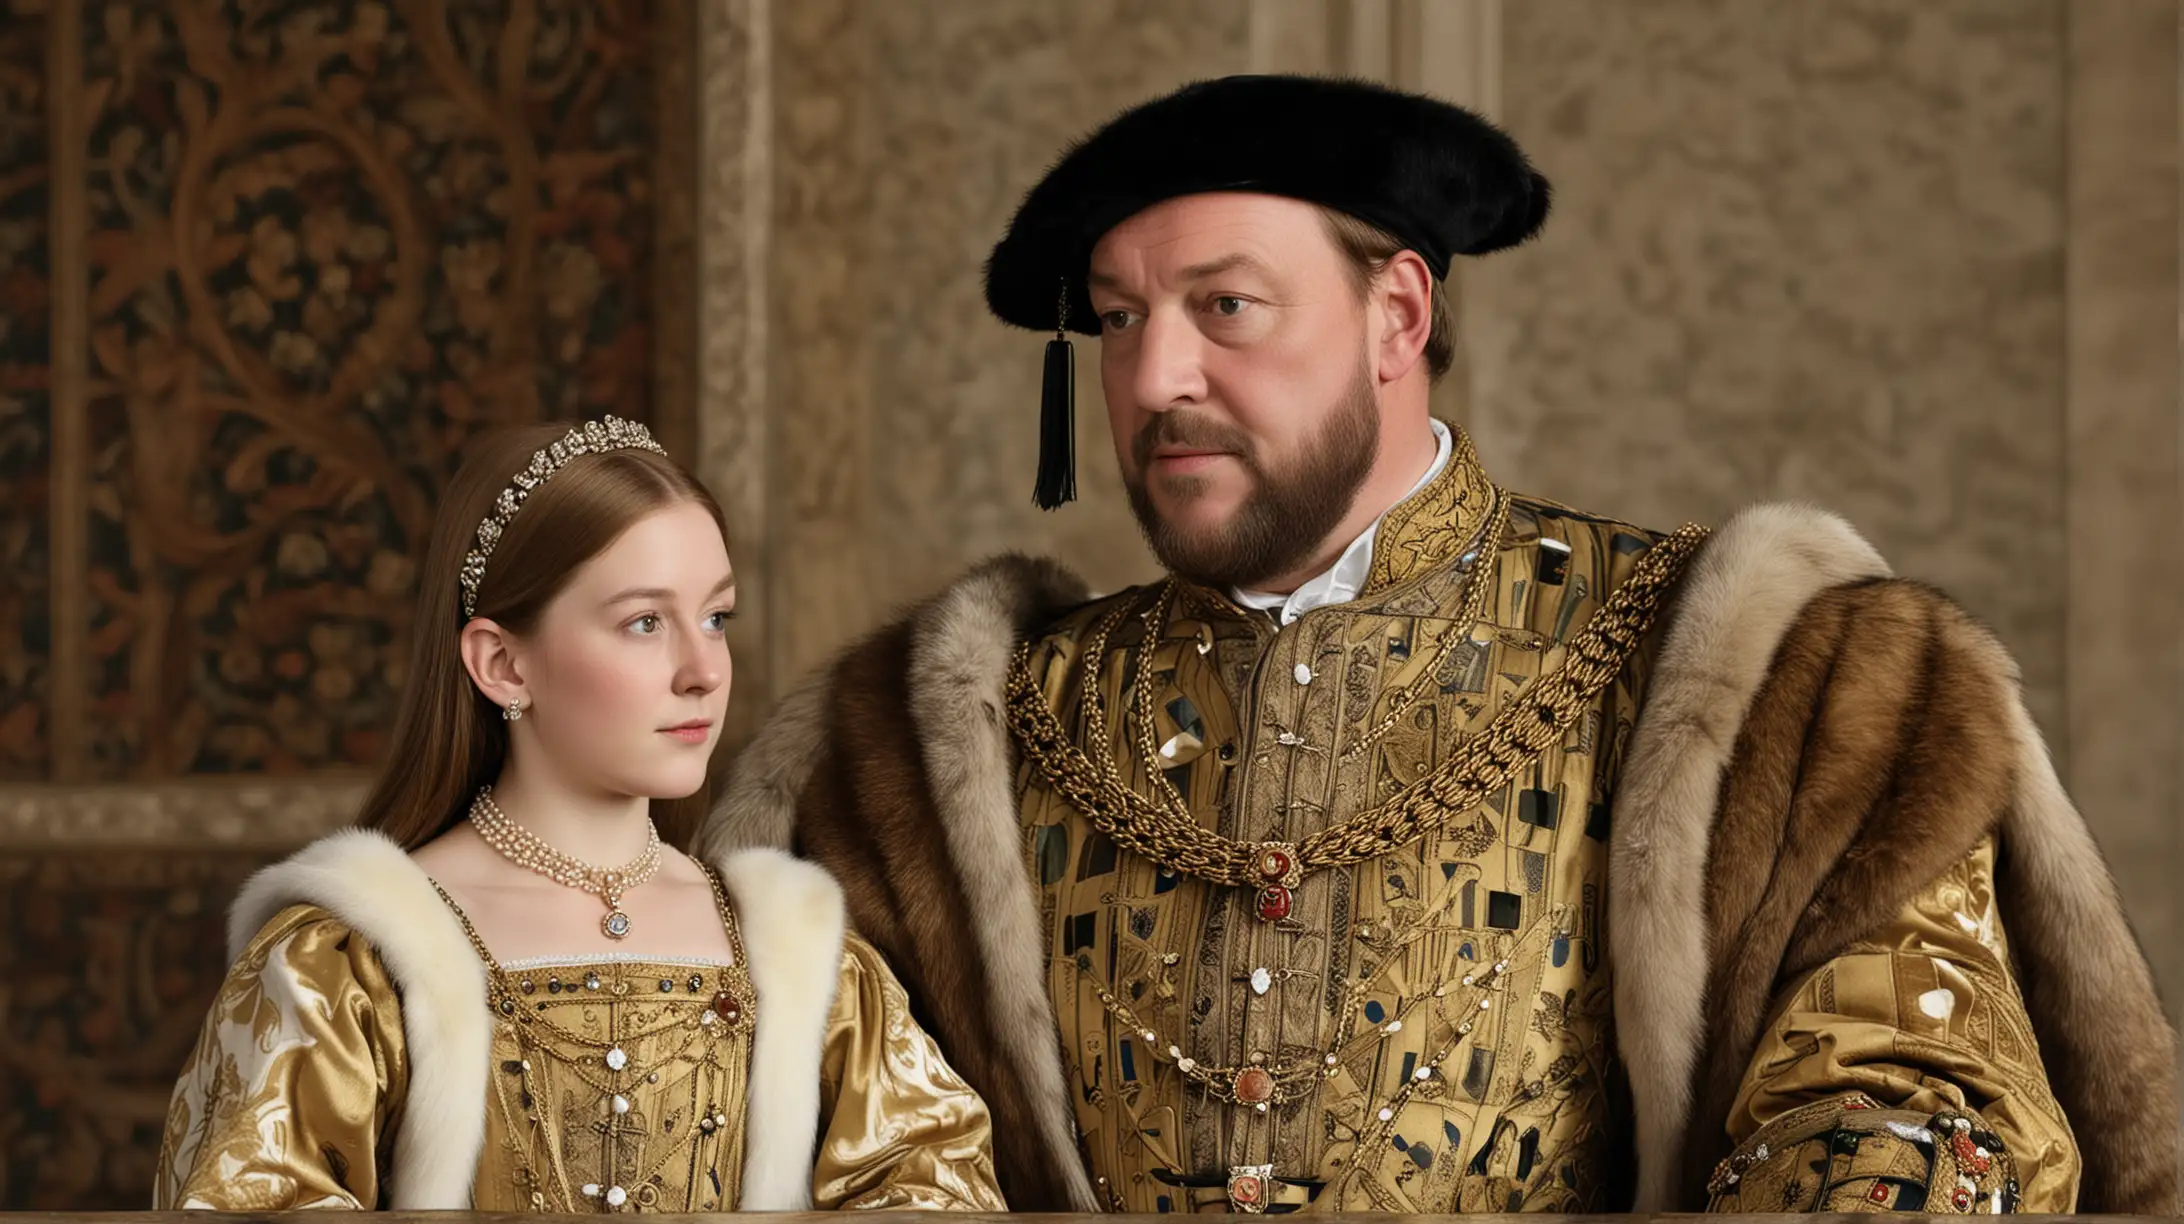 King Henry VIII and Daughter Mary in Royal Court Portrait